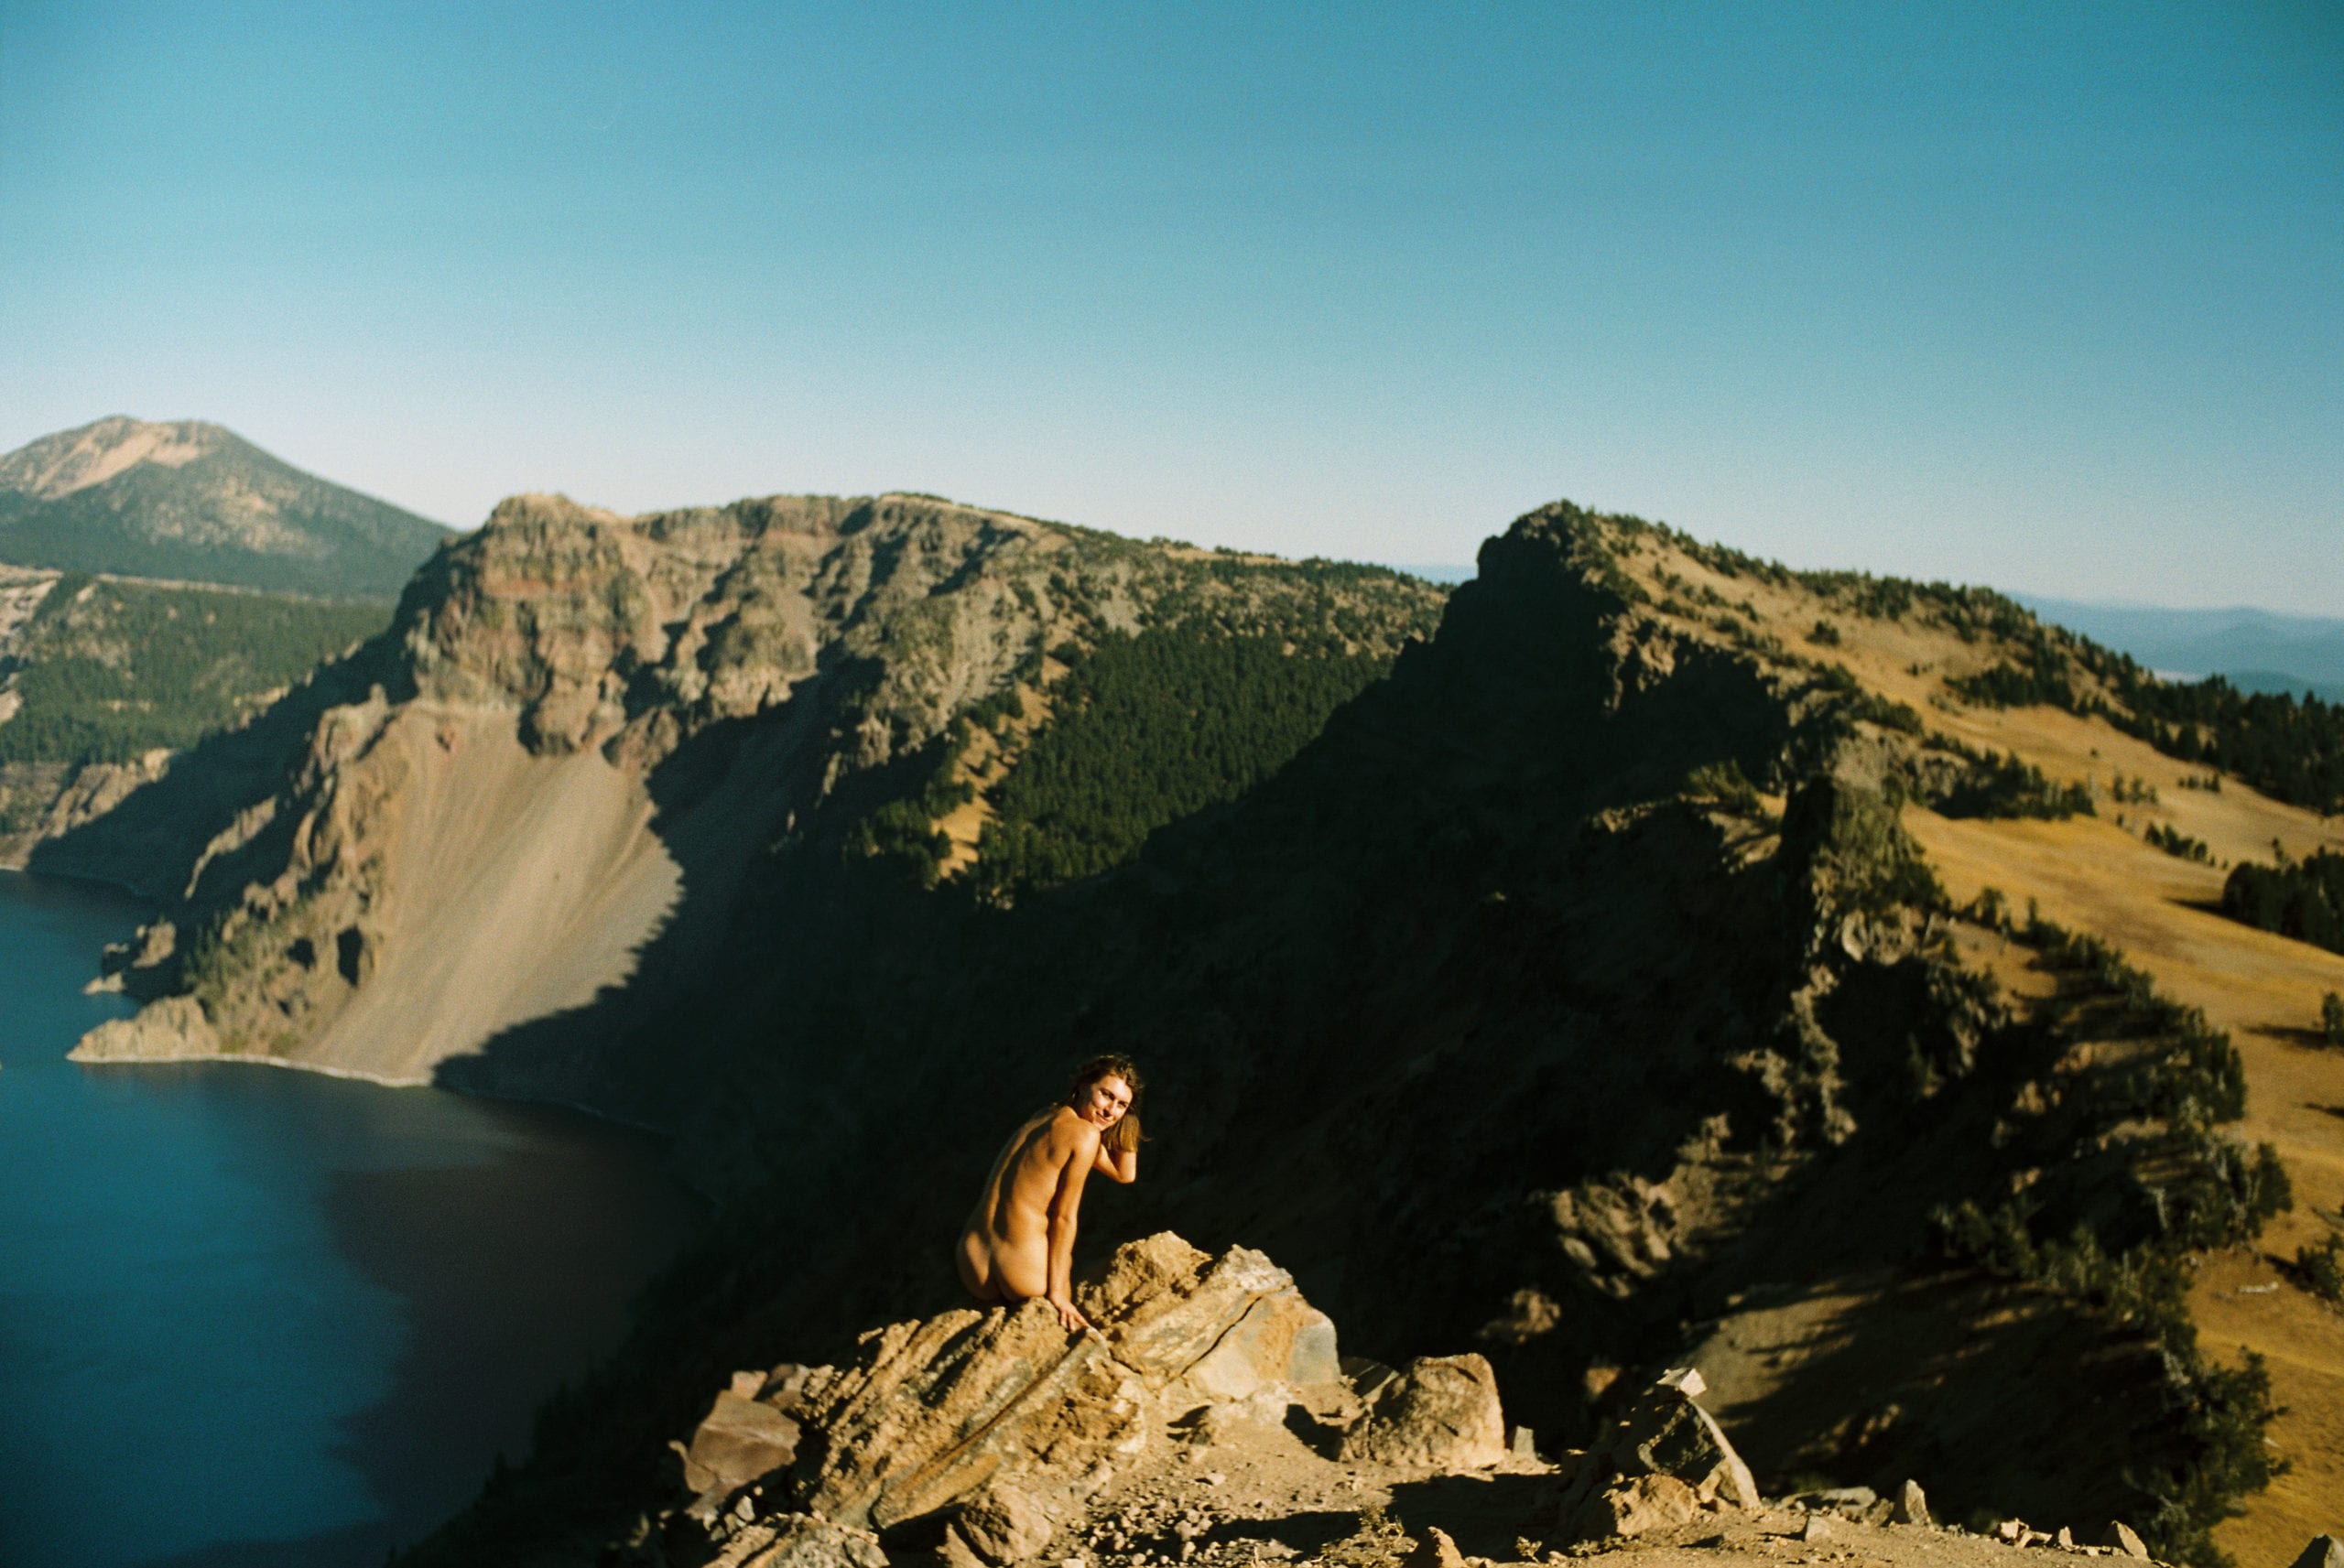 Adventurous boudoir session over Crater Lake in Oregon, to inspire wanderlust and promote self love!